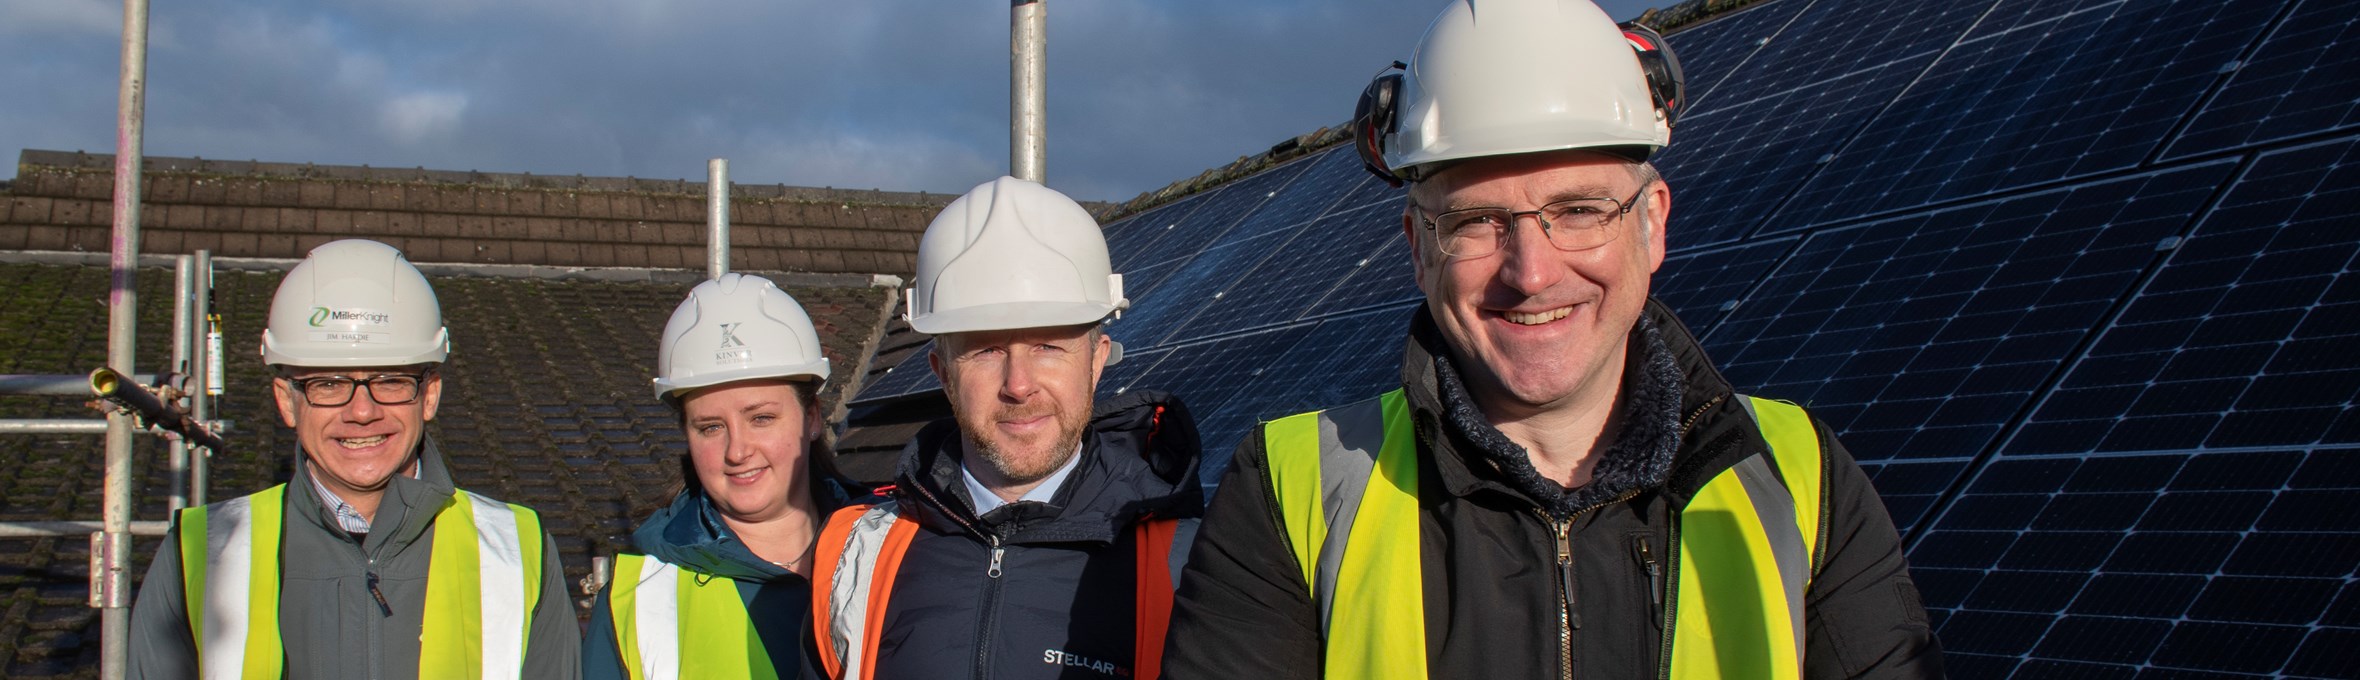 Cllr Relf smiling on a roof in front of solar panels 